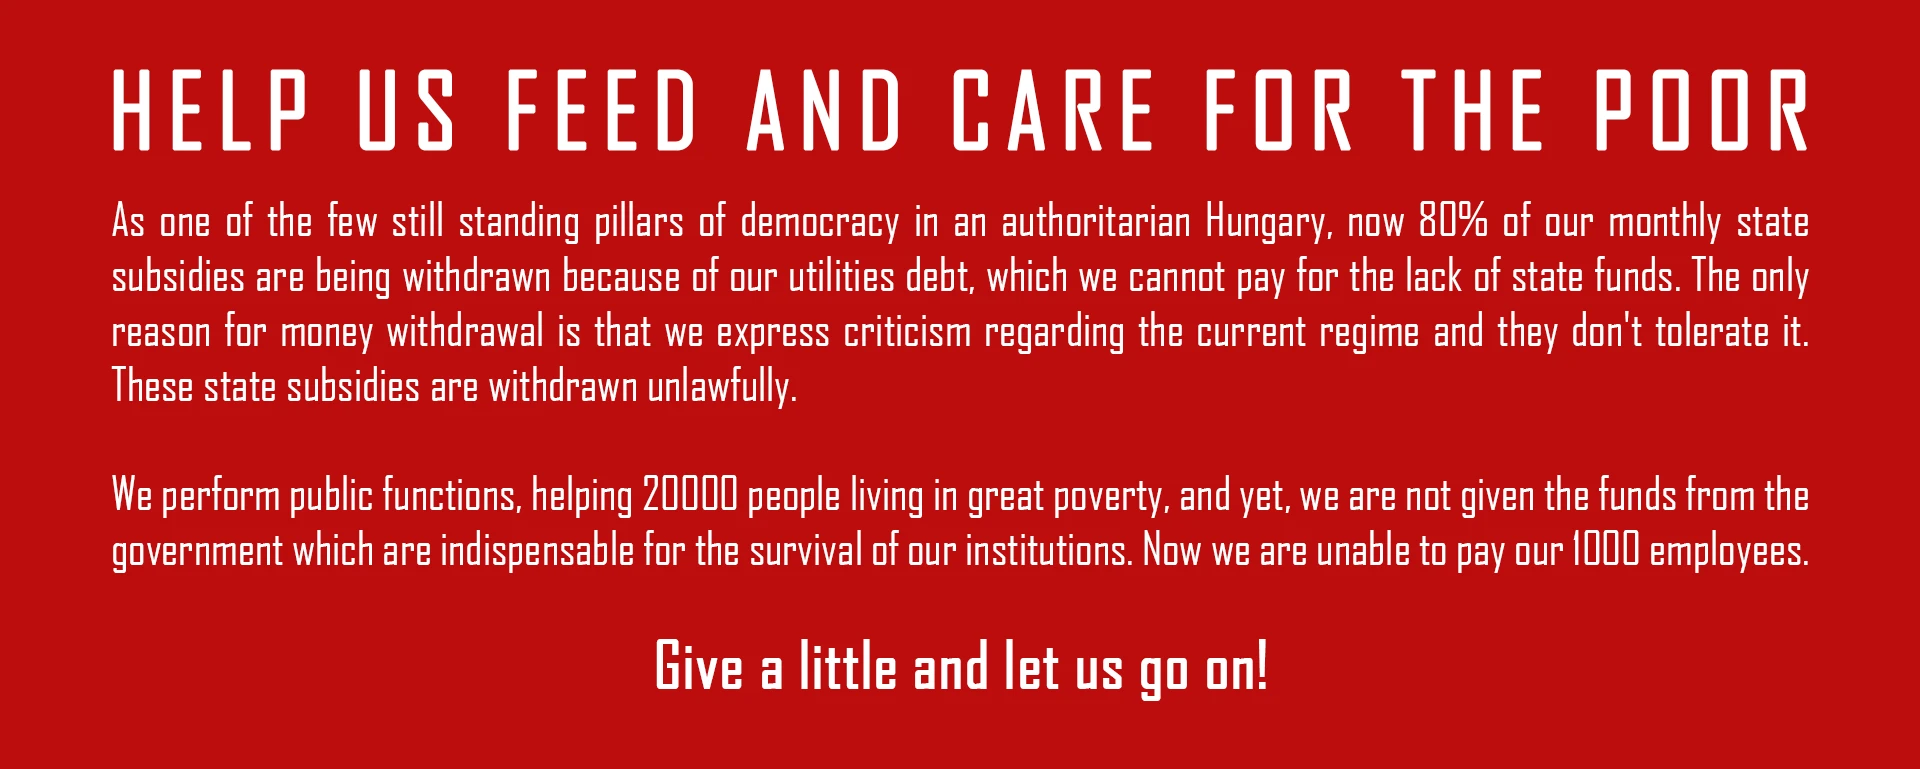 Help us feed and care for the poor